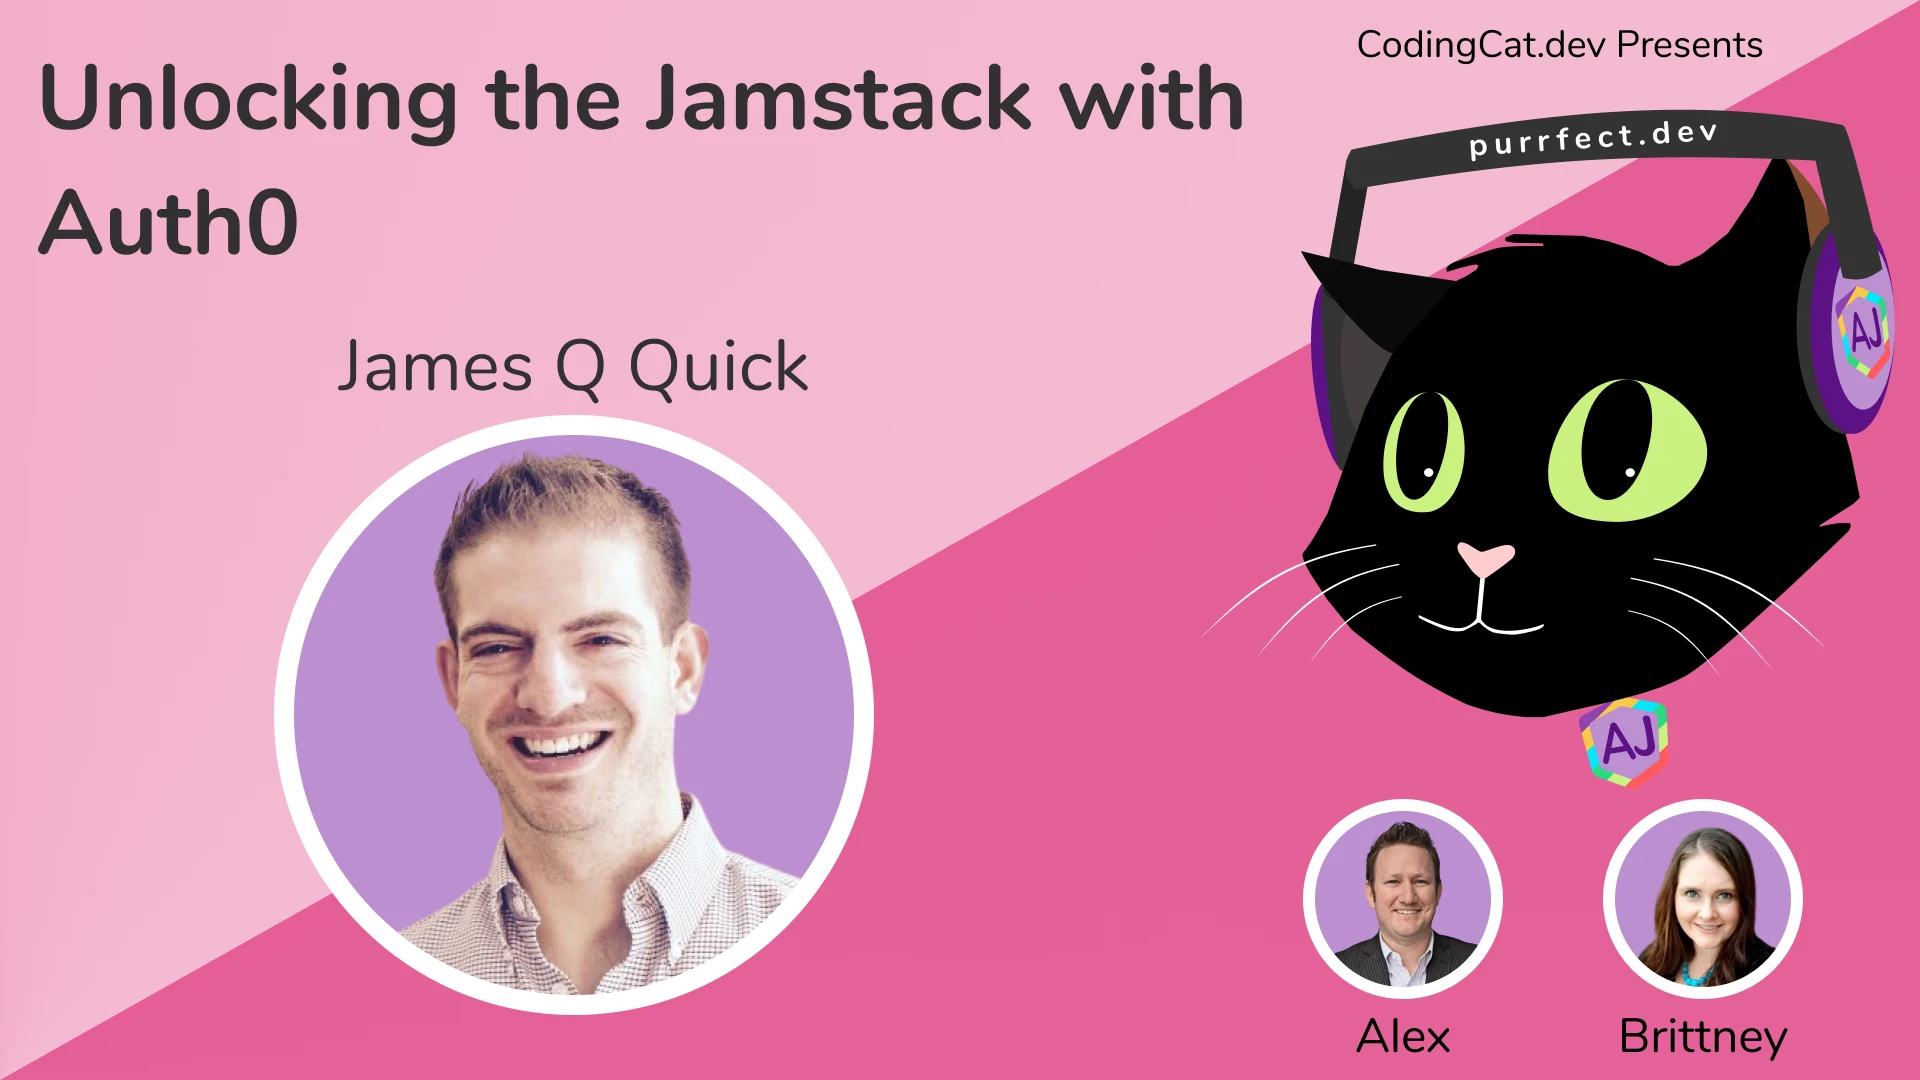 Authentication in the Jamstack on Coding Cat (CodingCat.dev)